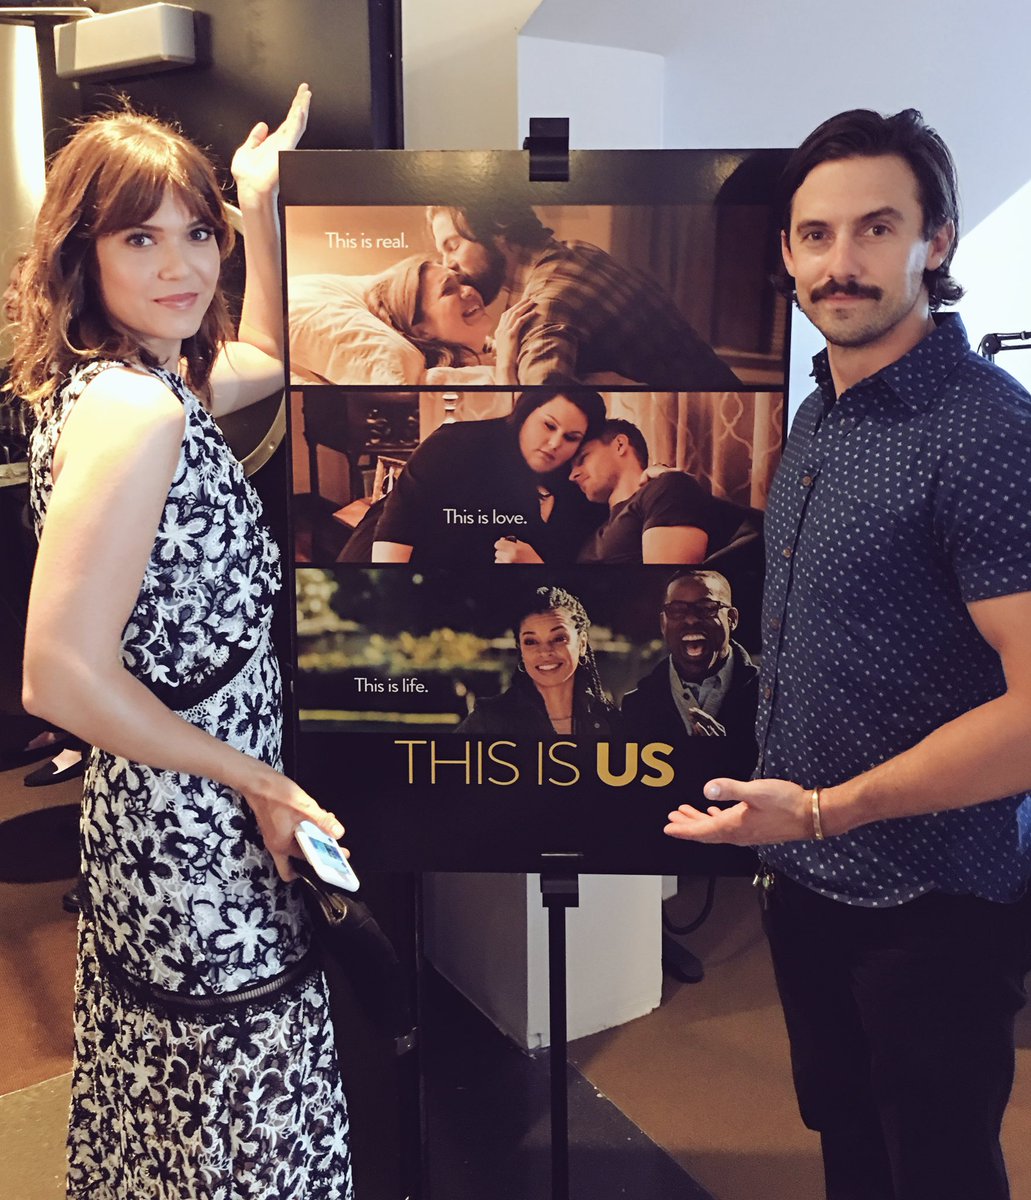 RT @NBCThisisUs: Get the tissues ready. #ThisIsUs is coming. https://t.co/3j7C1xhYJO